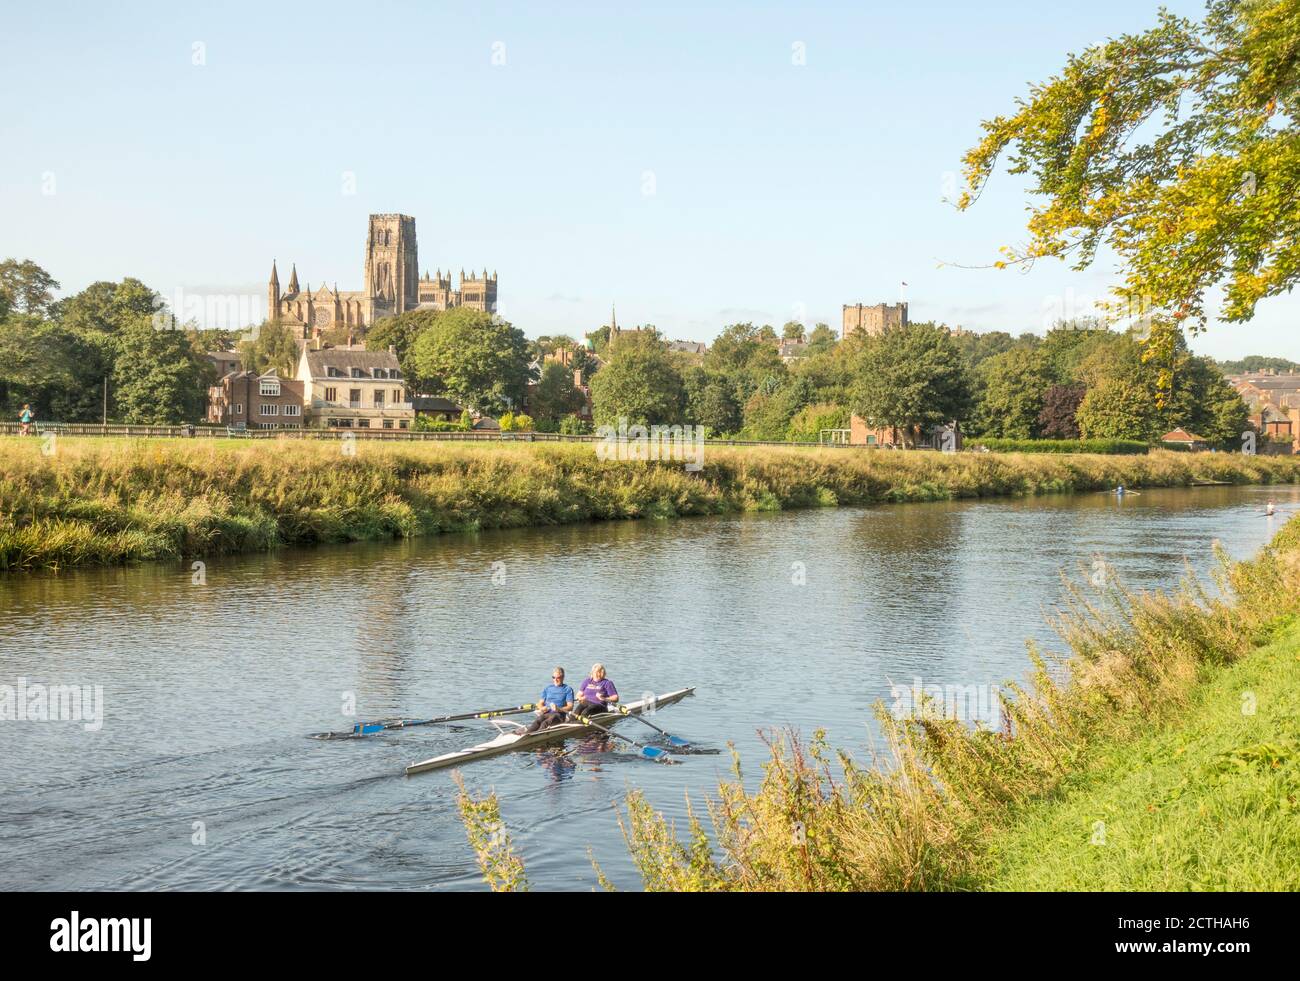 Mature couple sculling or rowing on the river with the cathedral and castle in the background, Durham city, Co. Durham, England, UK Stock Photo